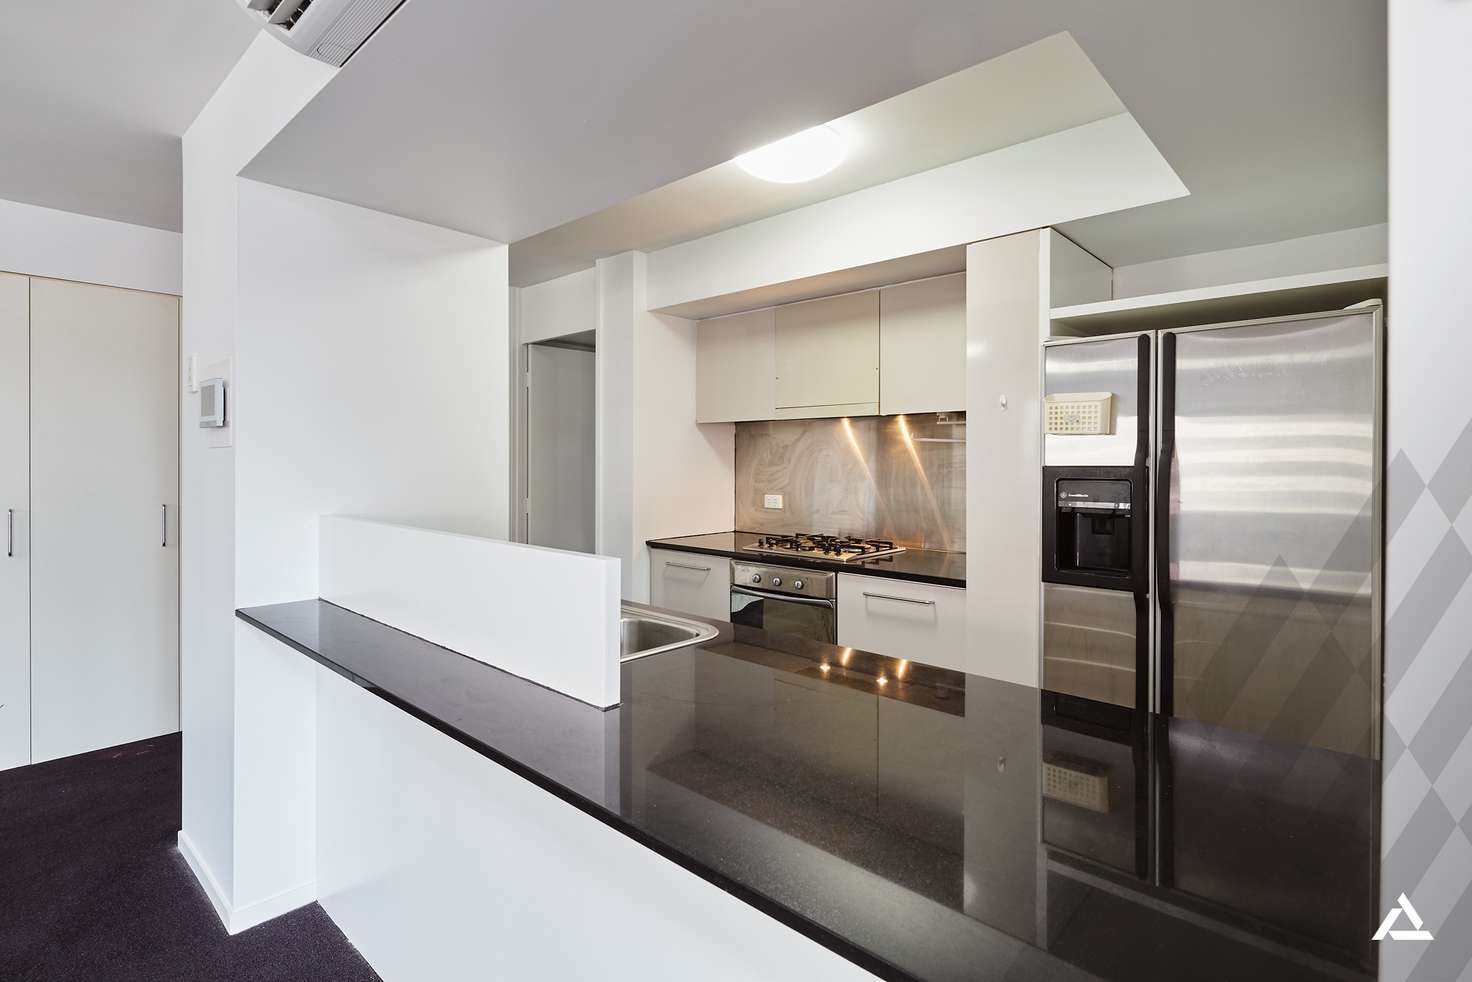 Main view of Homely apartment listing, 907/11-17 Cohen Place, Melbourne VIC 3000